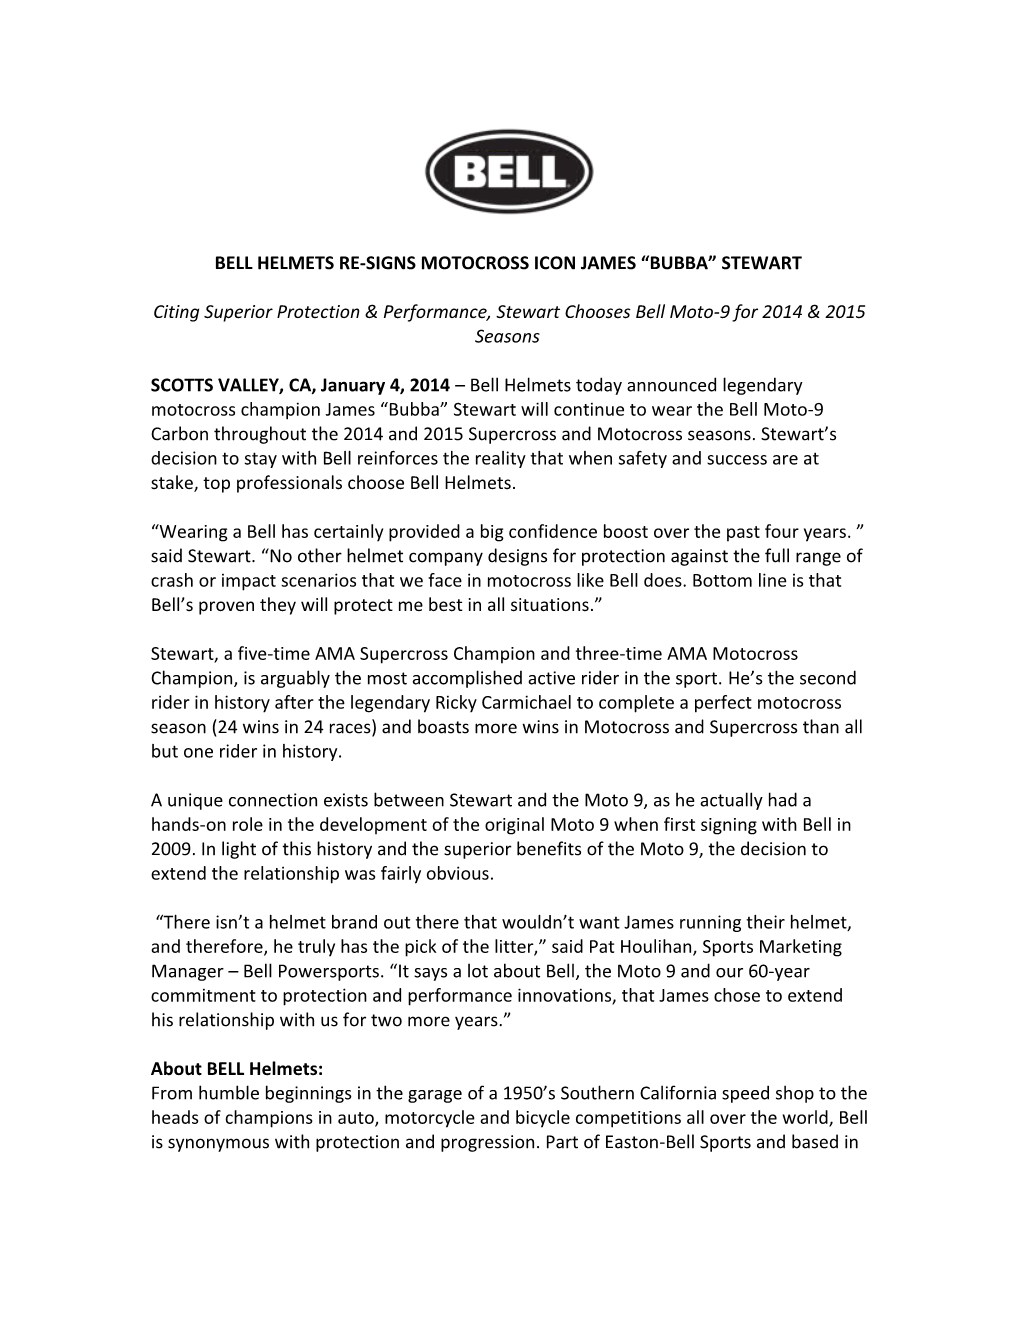 Bell Helmets Re-Signs Motocross Icon James Bubba Stewart